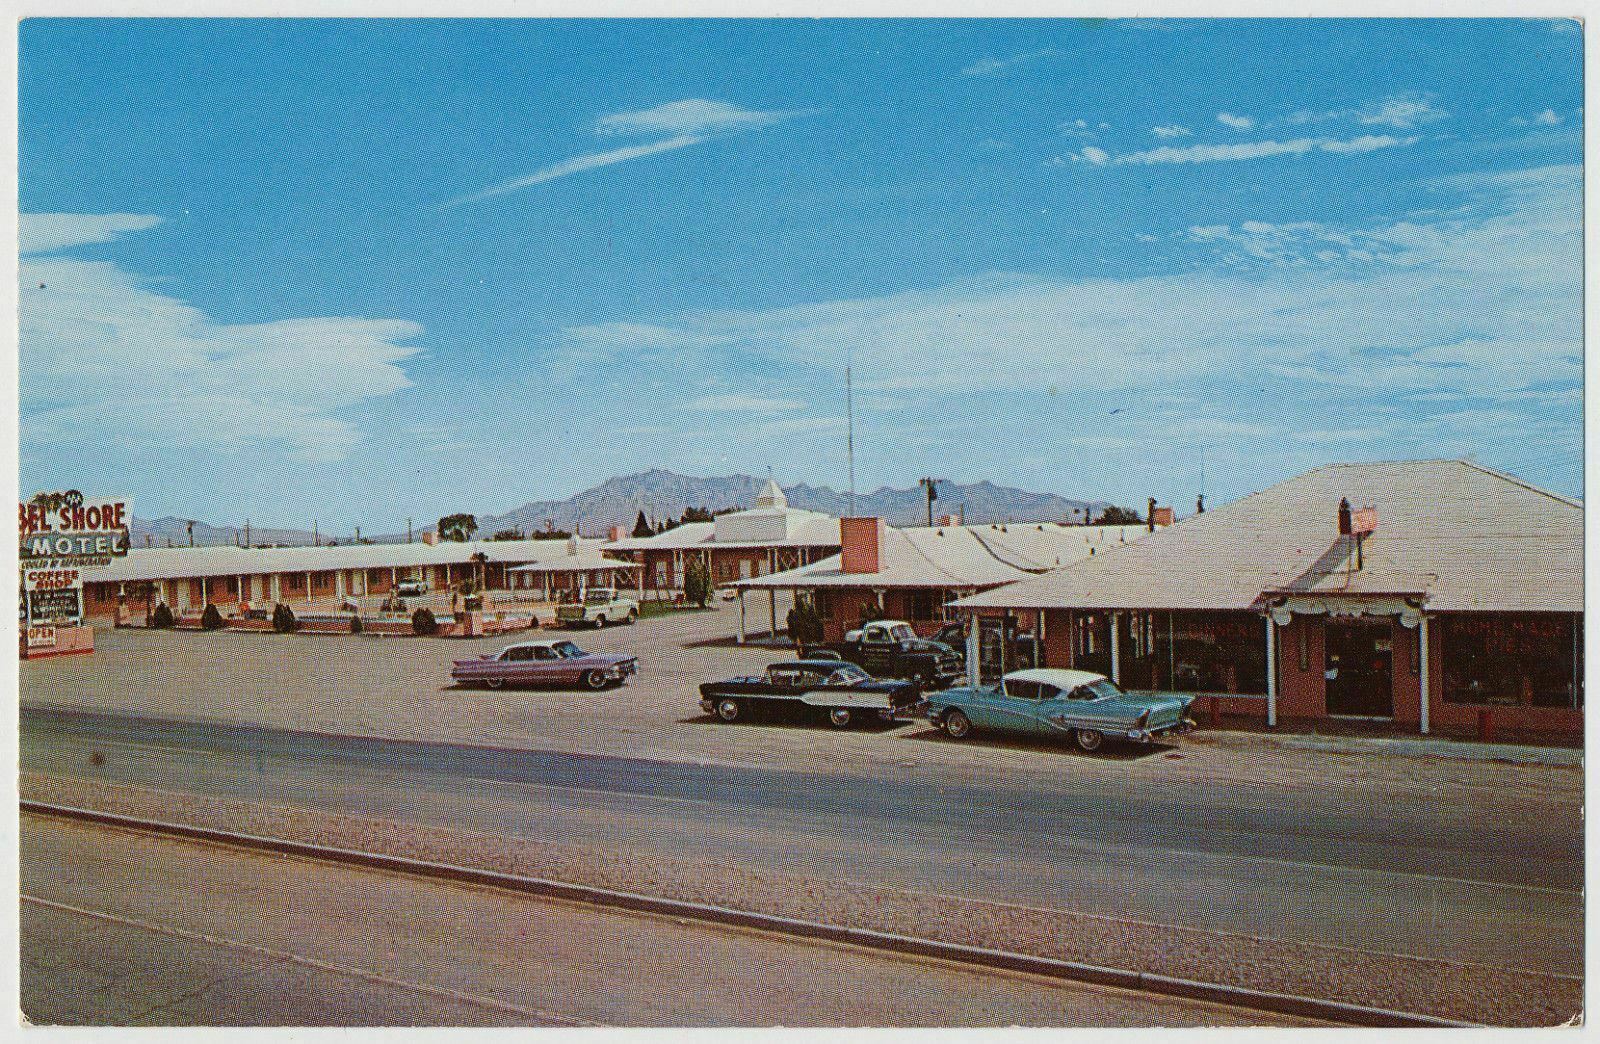 Bel Shore Motel and Cafe, Deming, New Mexico 